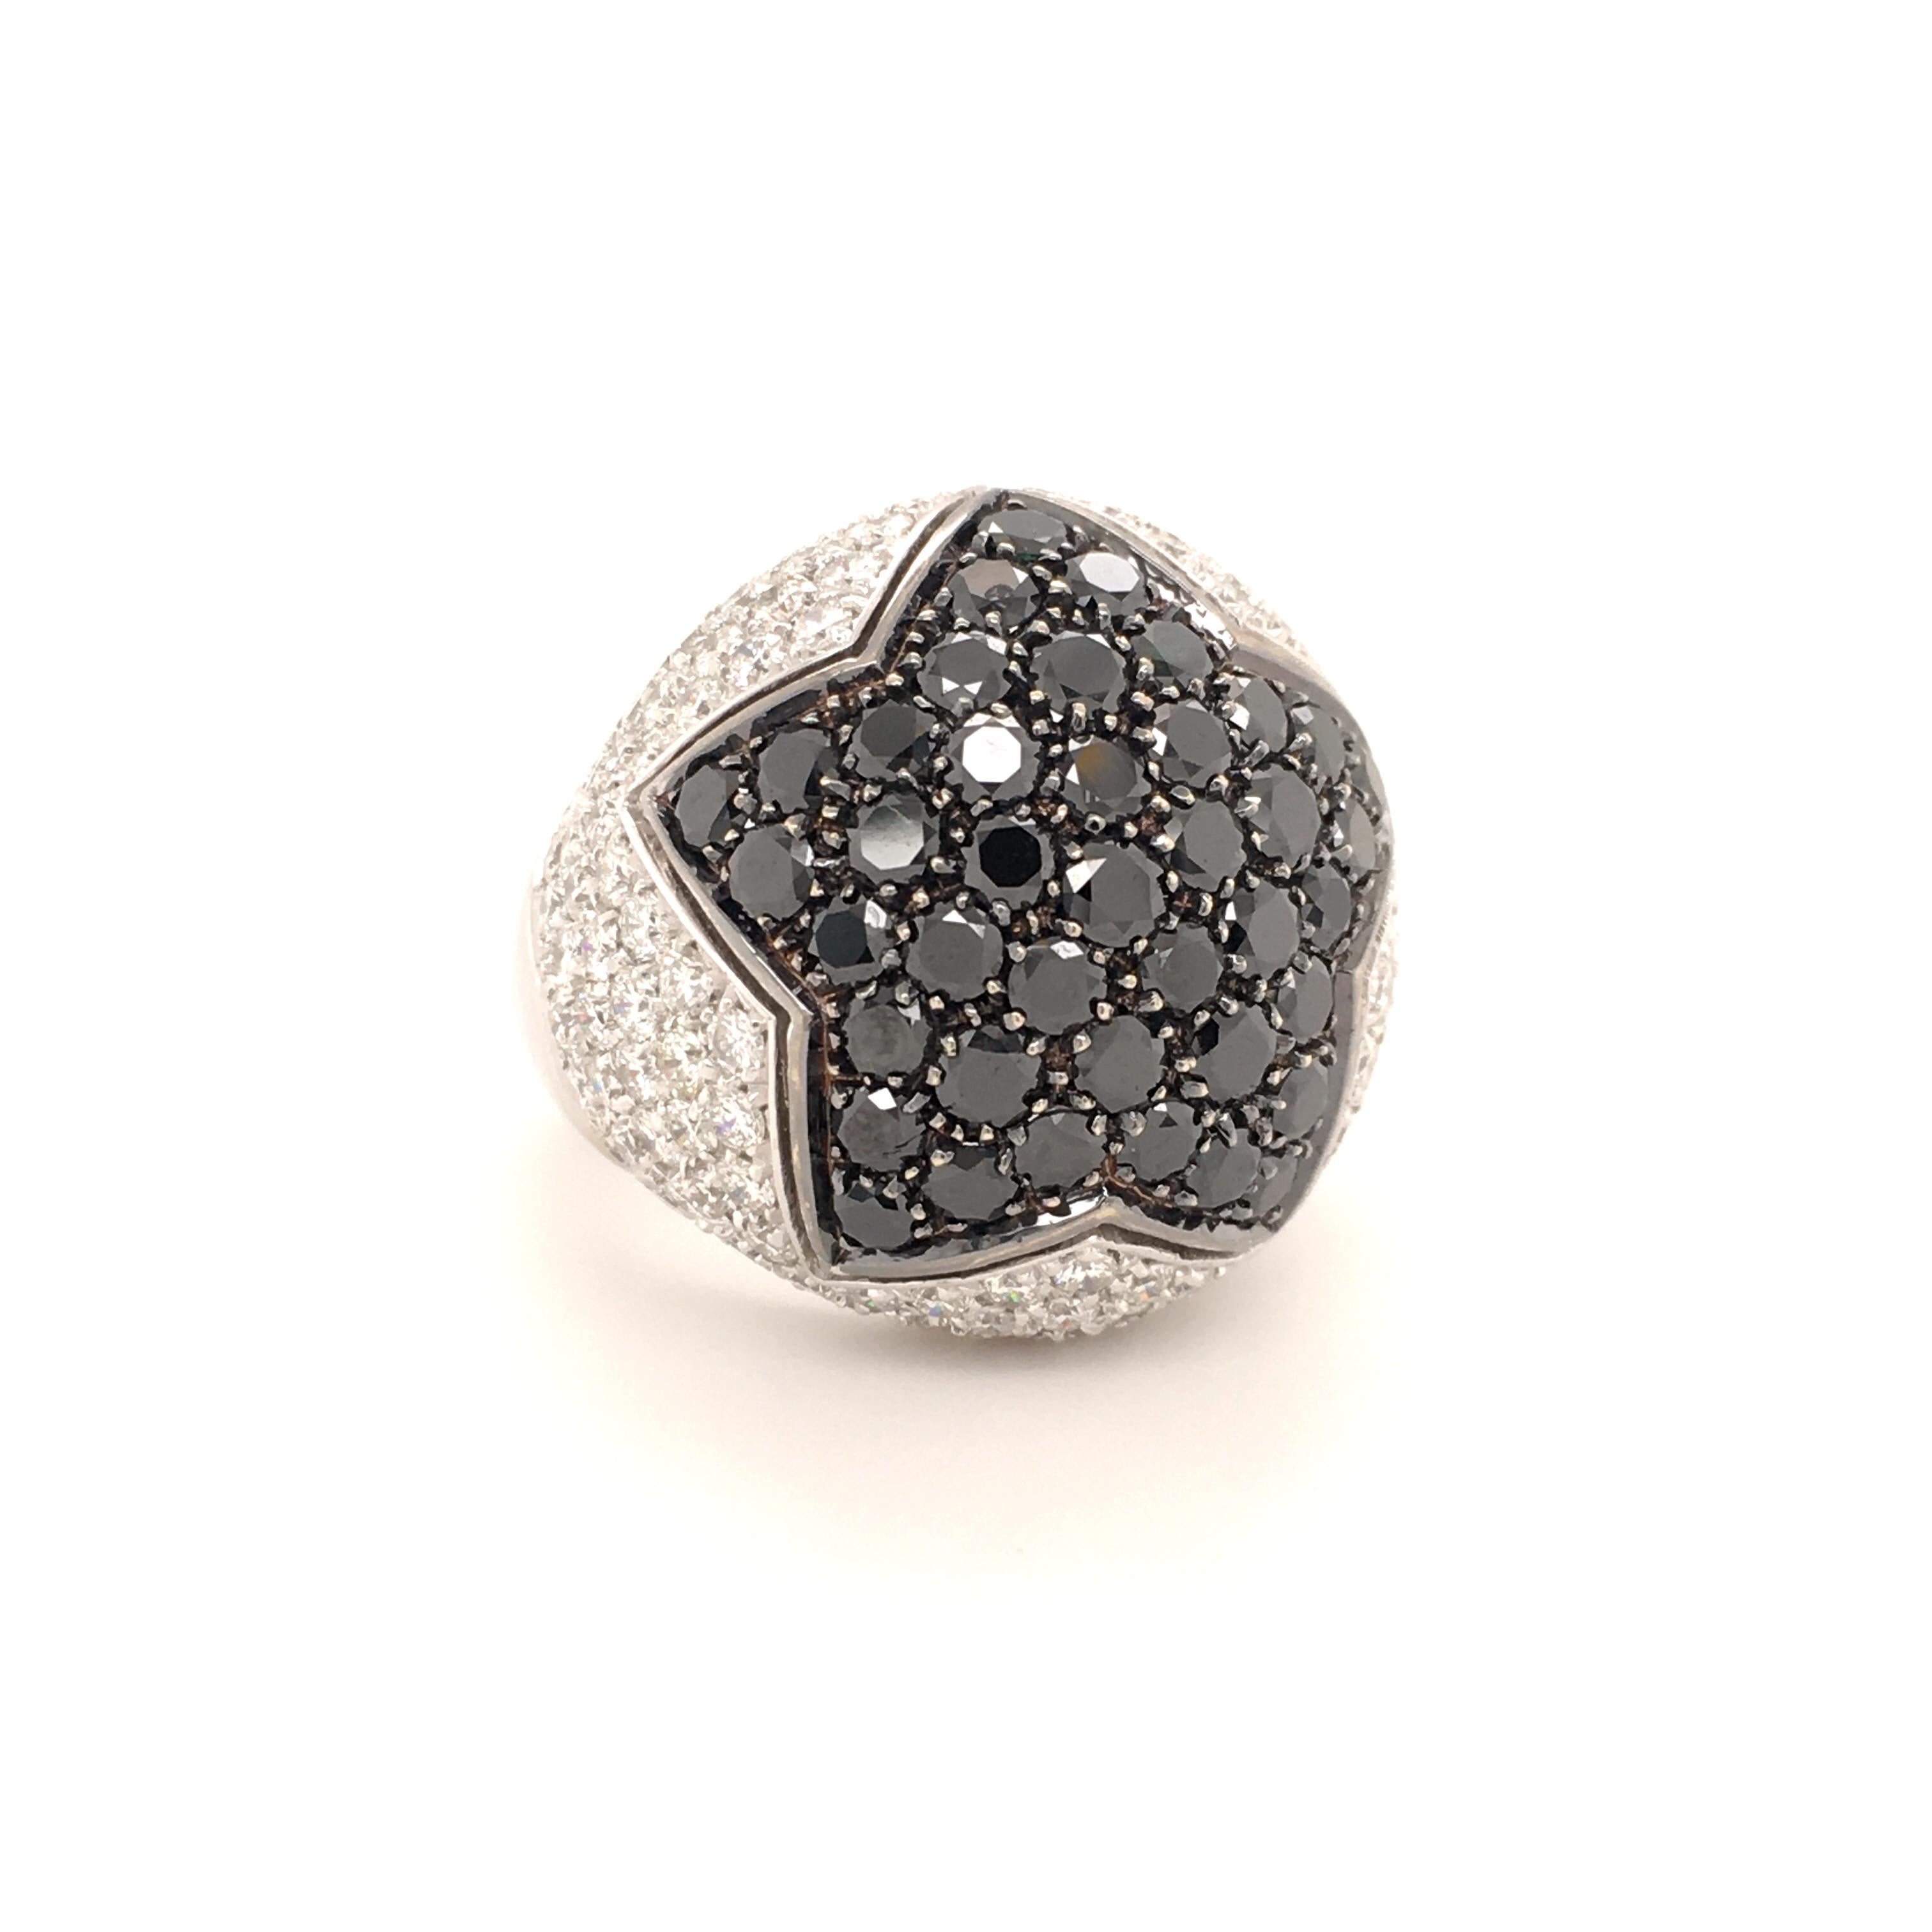 This bold and unique diamond star ring features 41 black diamonds, total weight 2.30 carats, surrounded by 147 white brilliant cut diamonds of G/H color and vs clarity.  

Size: 55.5 (EU) / 7.5 (US)
Assay mark: 750